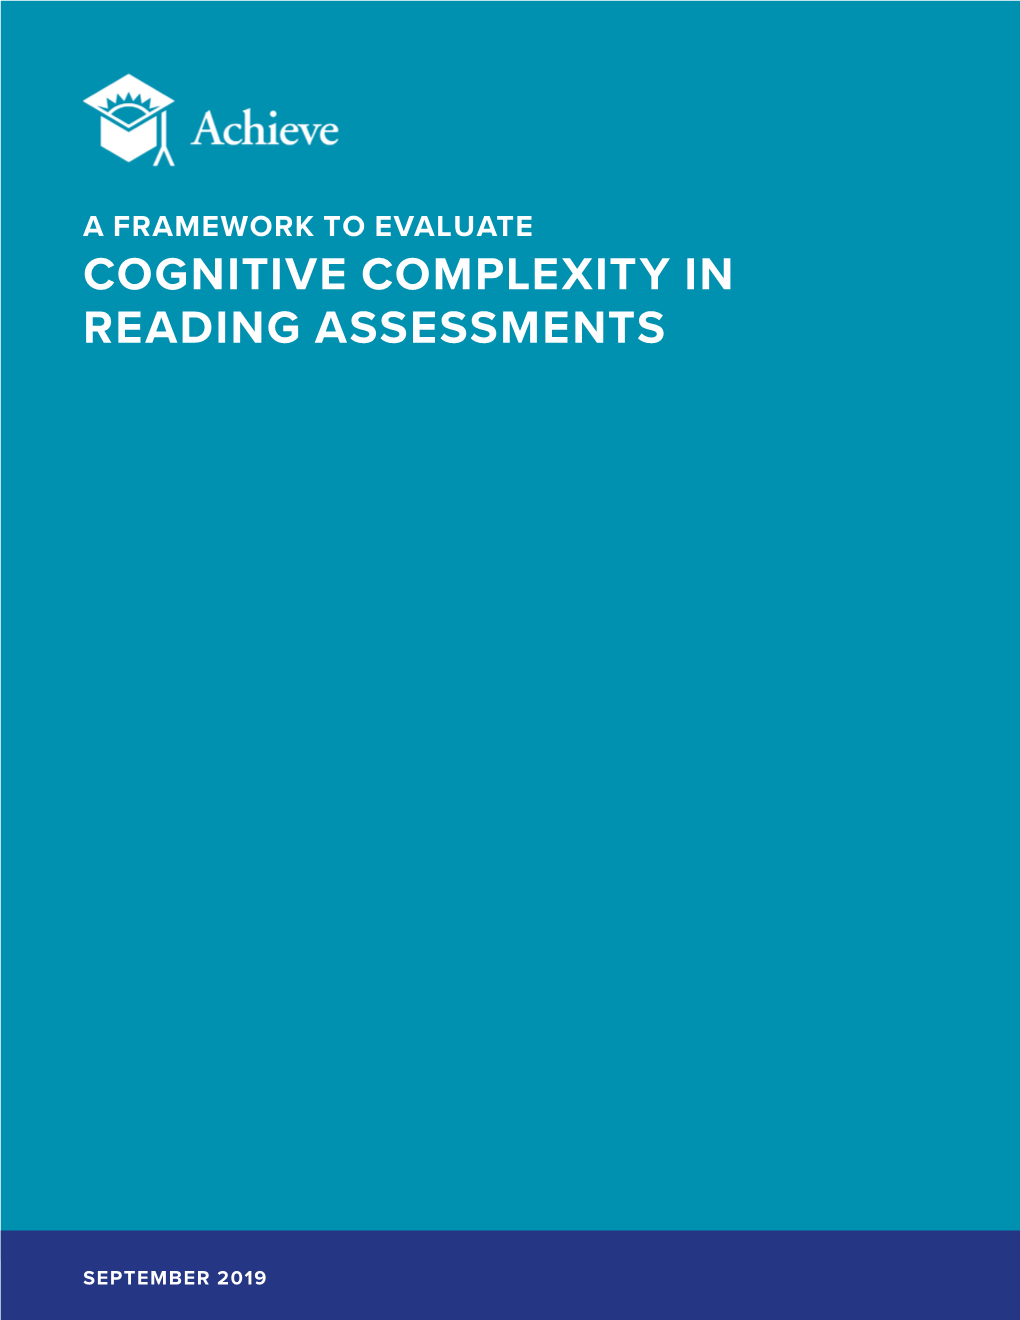 Cognitive Complexity in Reading Assessments